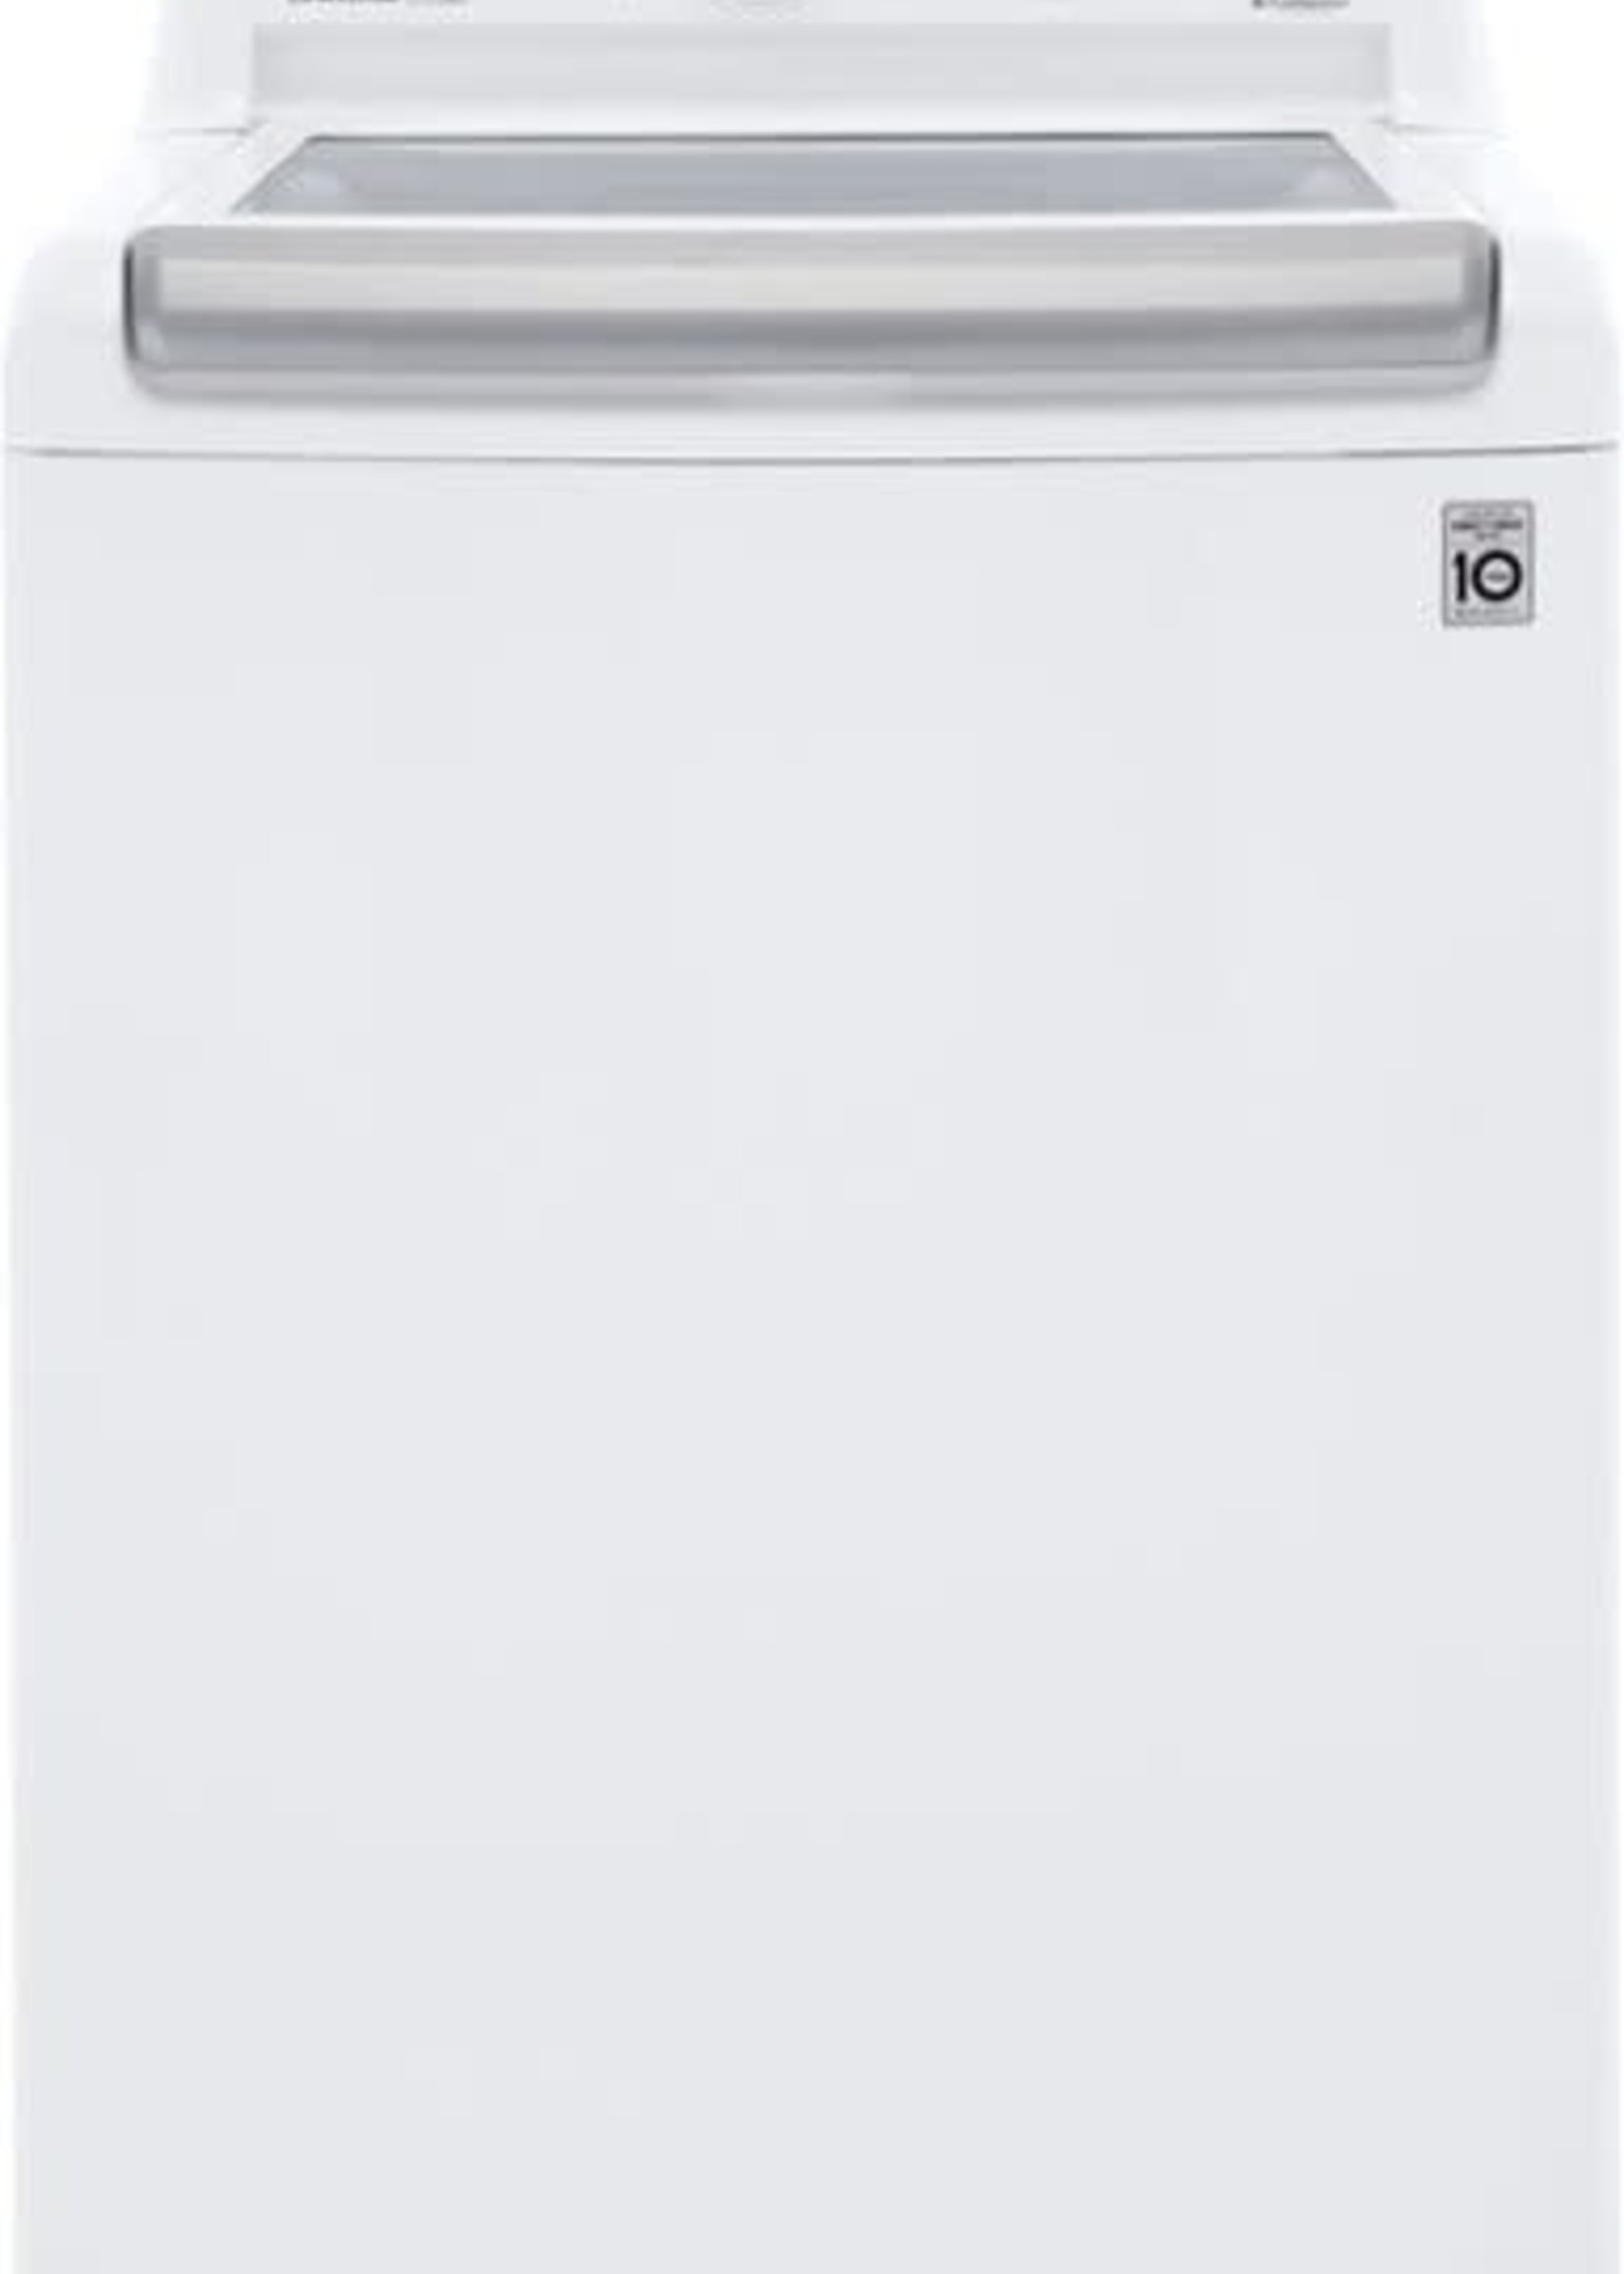 LG *LG  WT7150CW  5.0 cu. ft. Mega Capacity White Top Load Washer with TurboDrum Technology